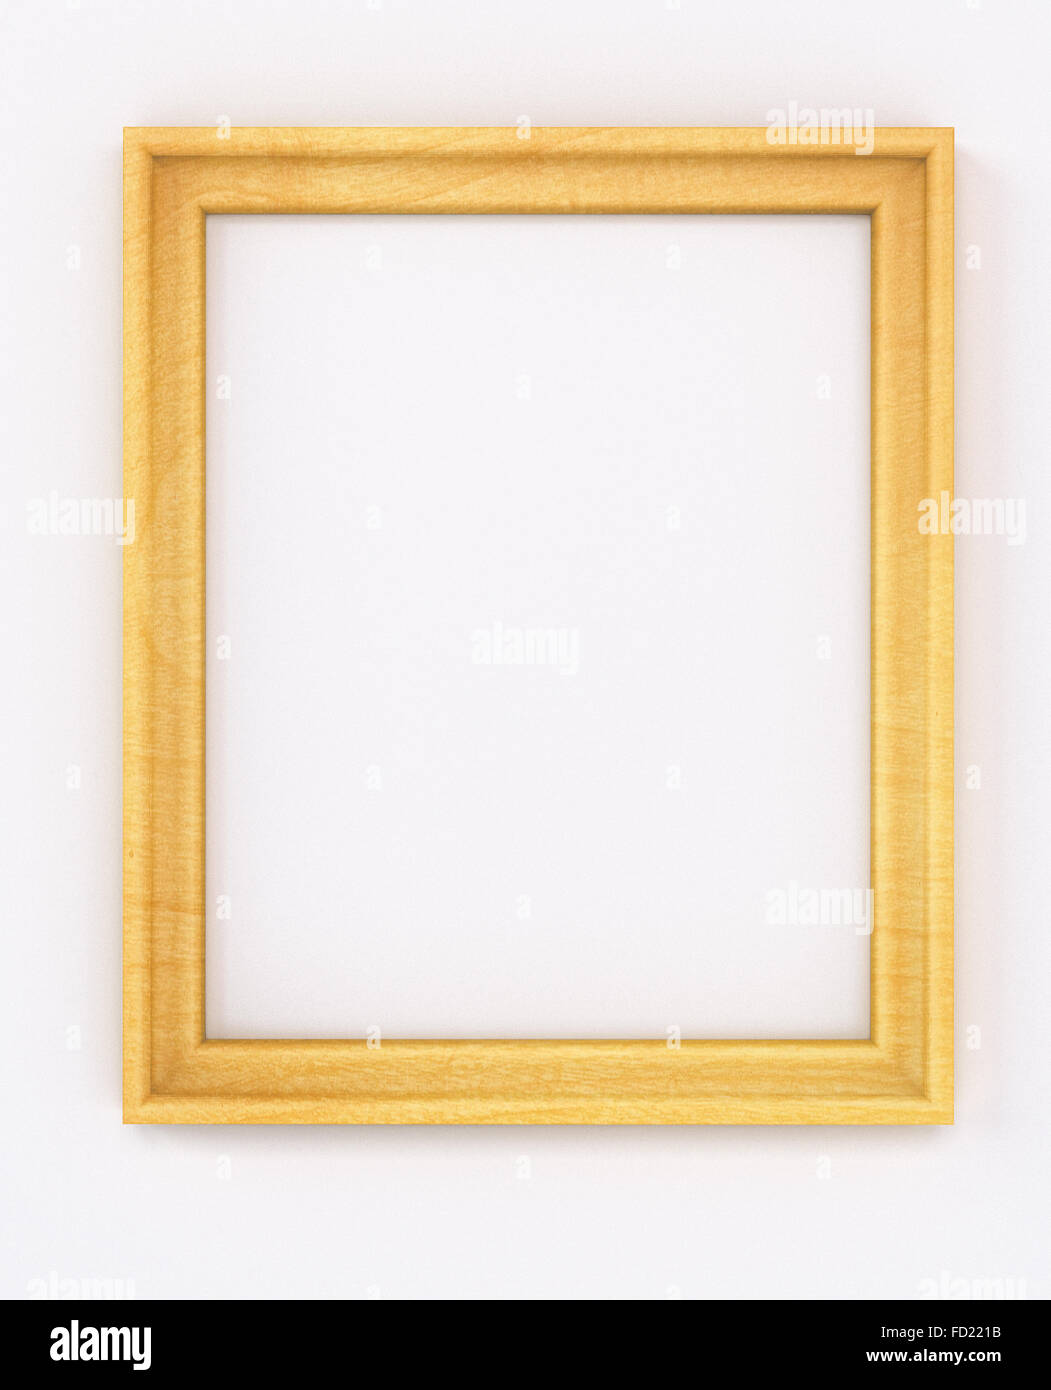 empty cadre without content. blank vertical portrait frame front view isolated on white background Stock Photo